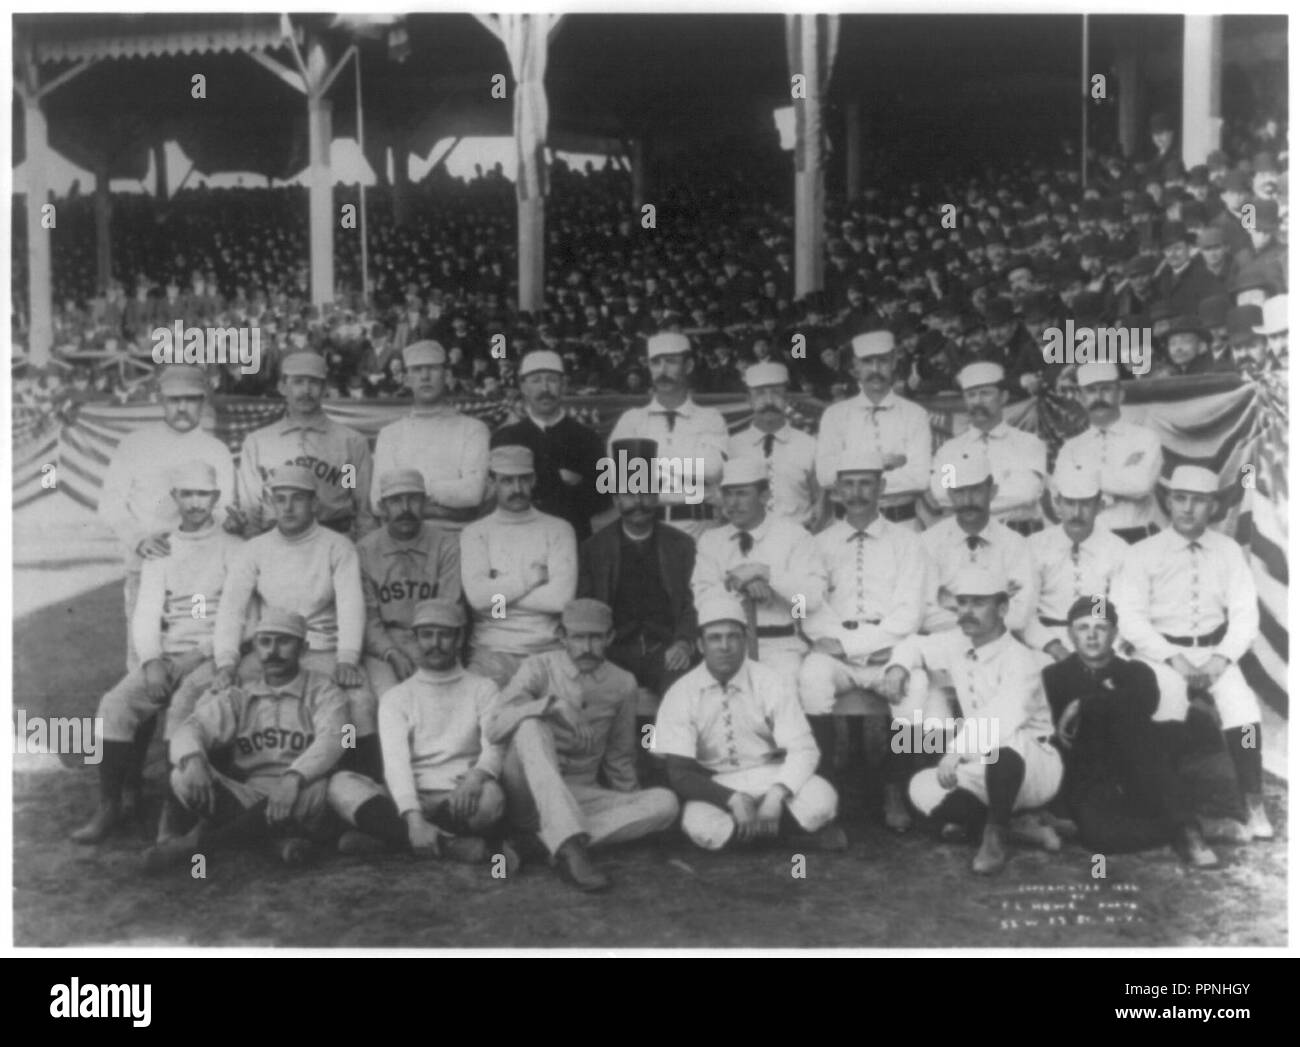 Boston and New York players on opening day, 1886, at the Polo Grounds, 5th Ave. & 110th St., N.Y.C. posed in front of stands; Boston player in back rowon left has his middle finger raised in Stock Photo